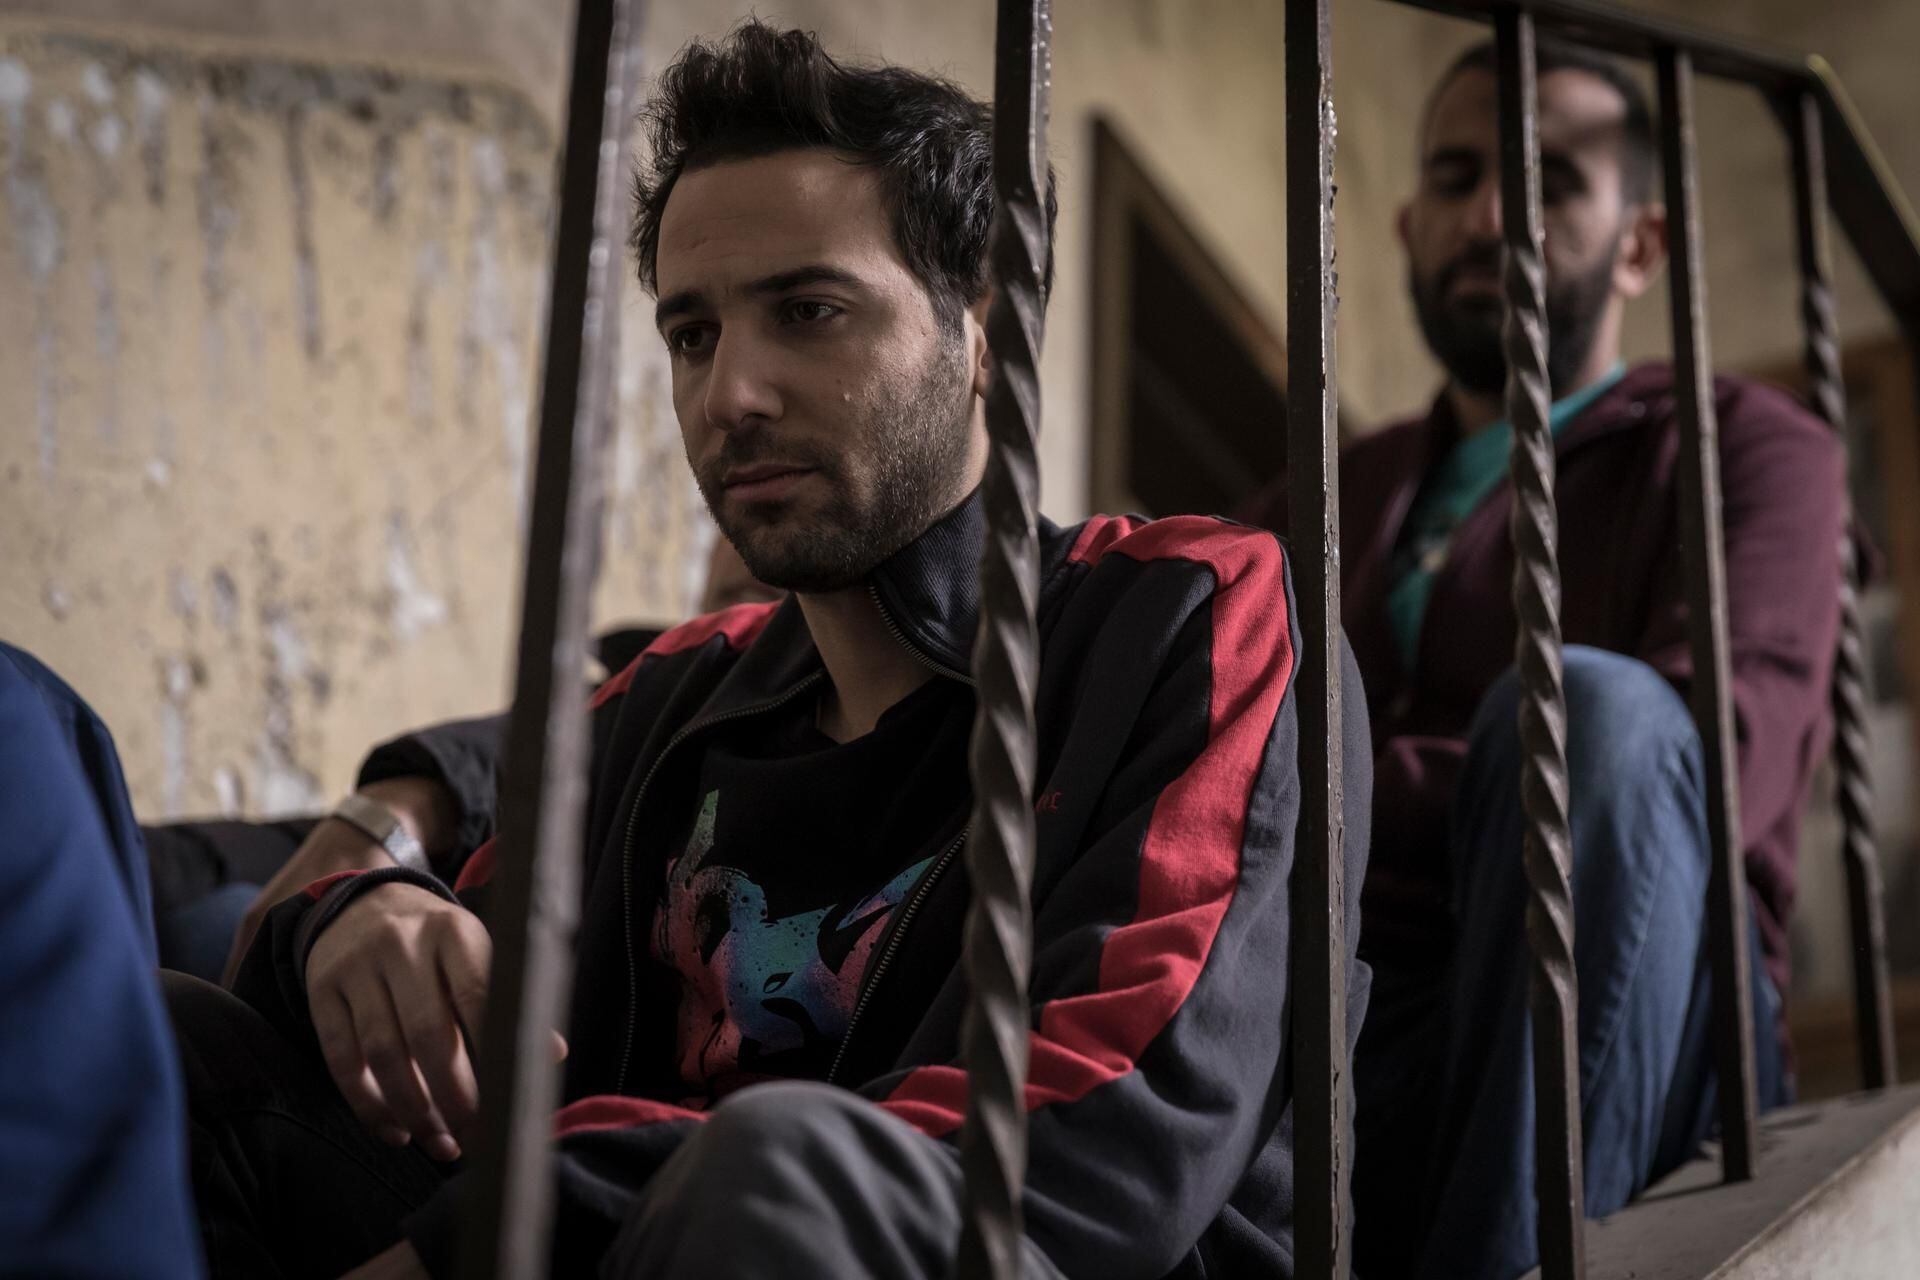 Egyptian actor Karim Kassem on his new film and breaking stereotypes